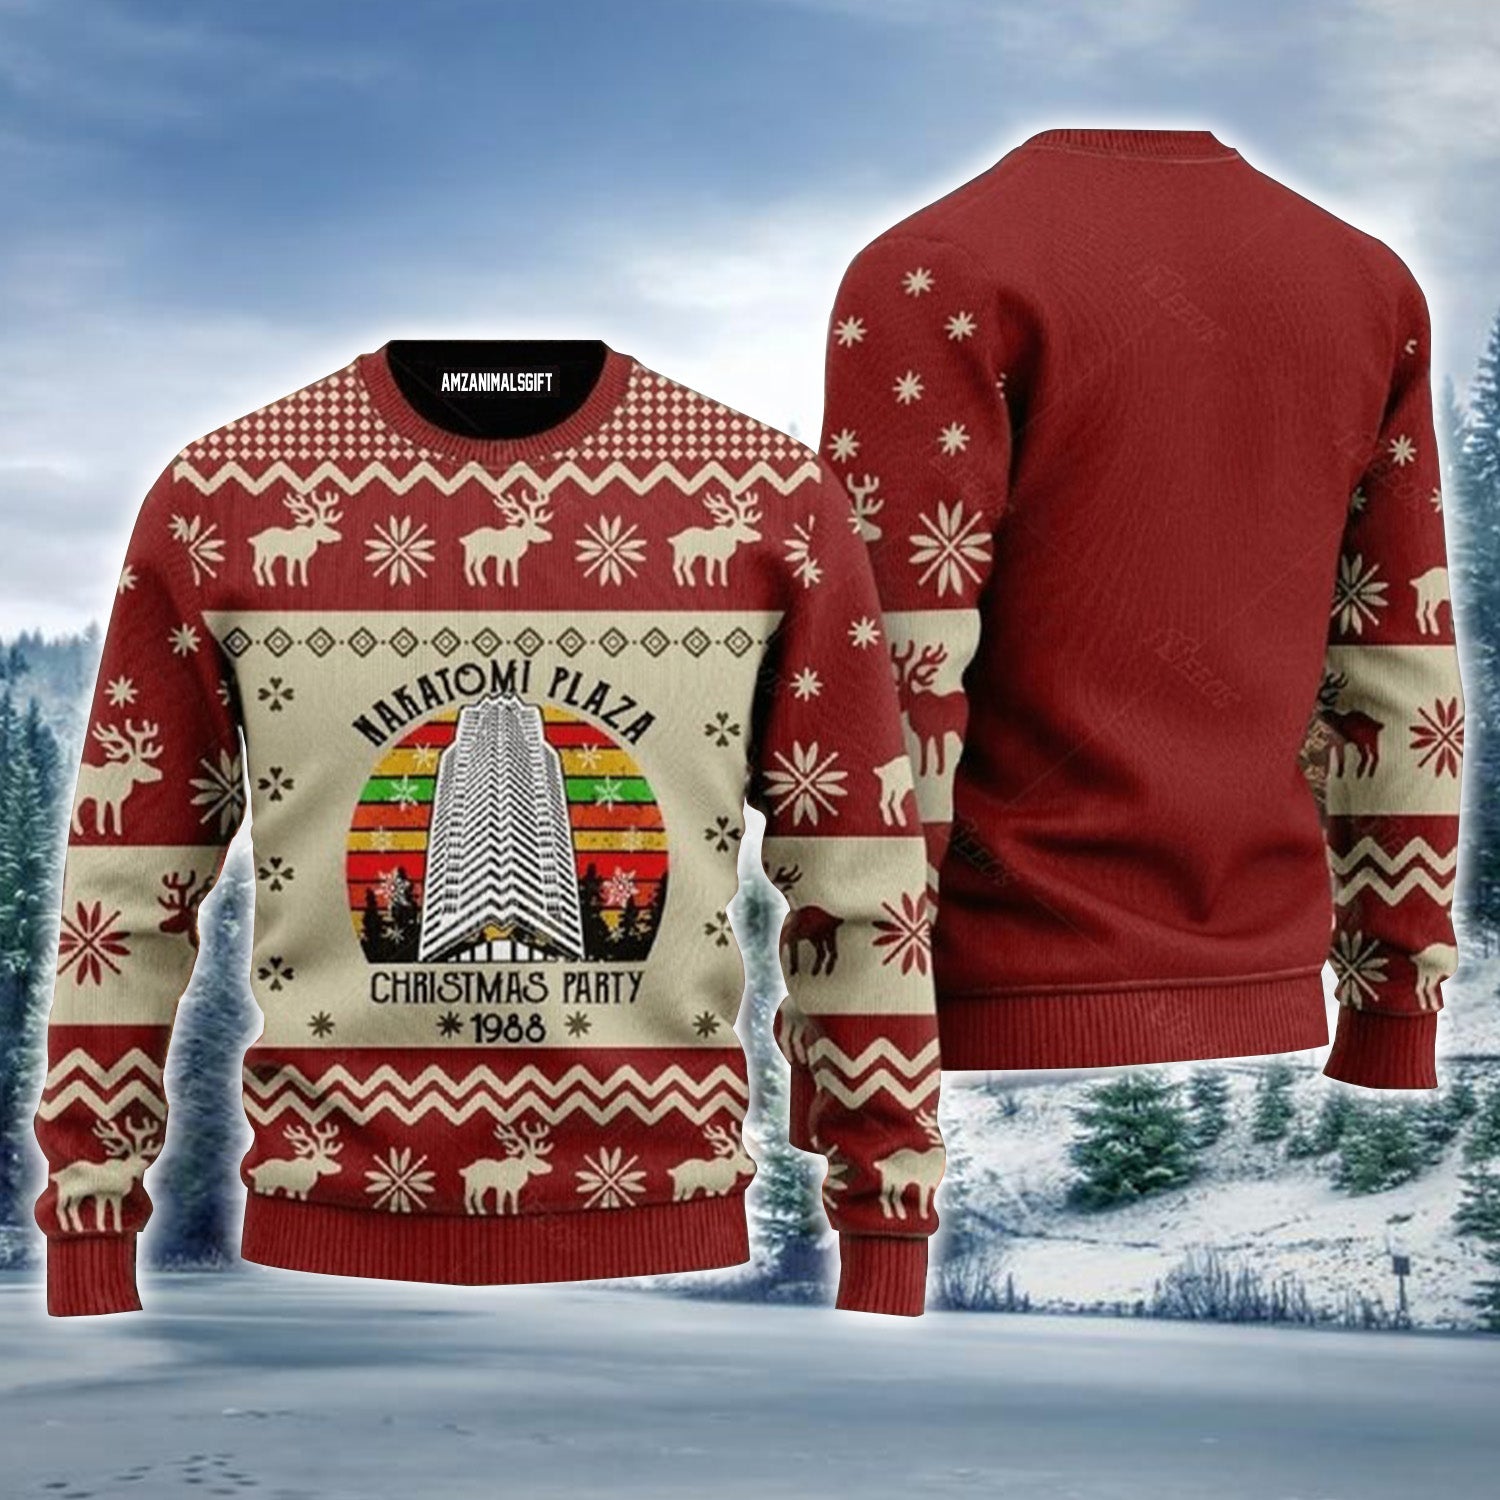 Nakatomi Plaza Party 1988 Urly Christmas Sweater, Christmas Pattern Sweater For Men & Women - Perfect Gift For Christmas, Family, Friends